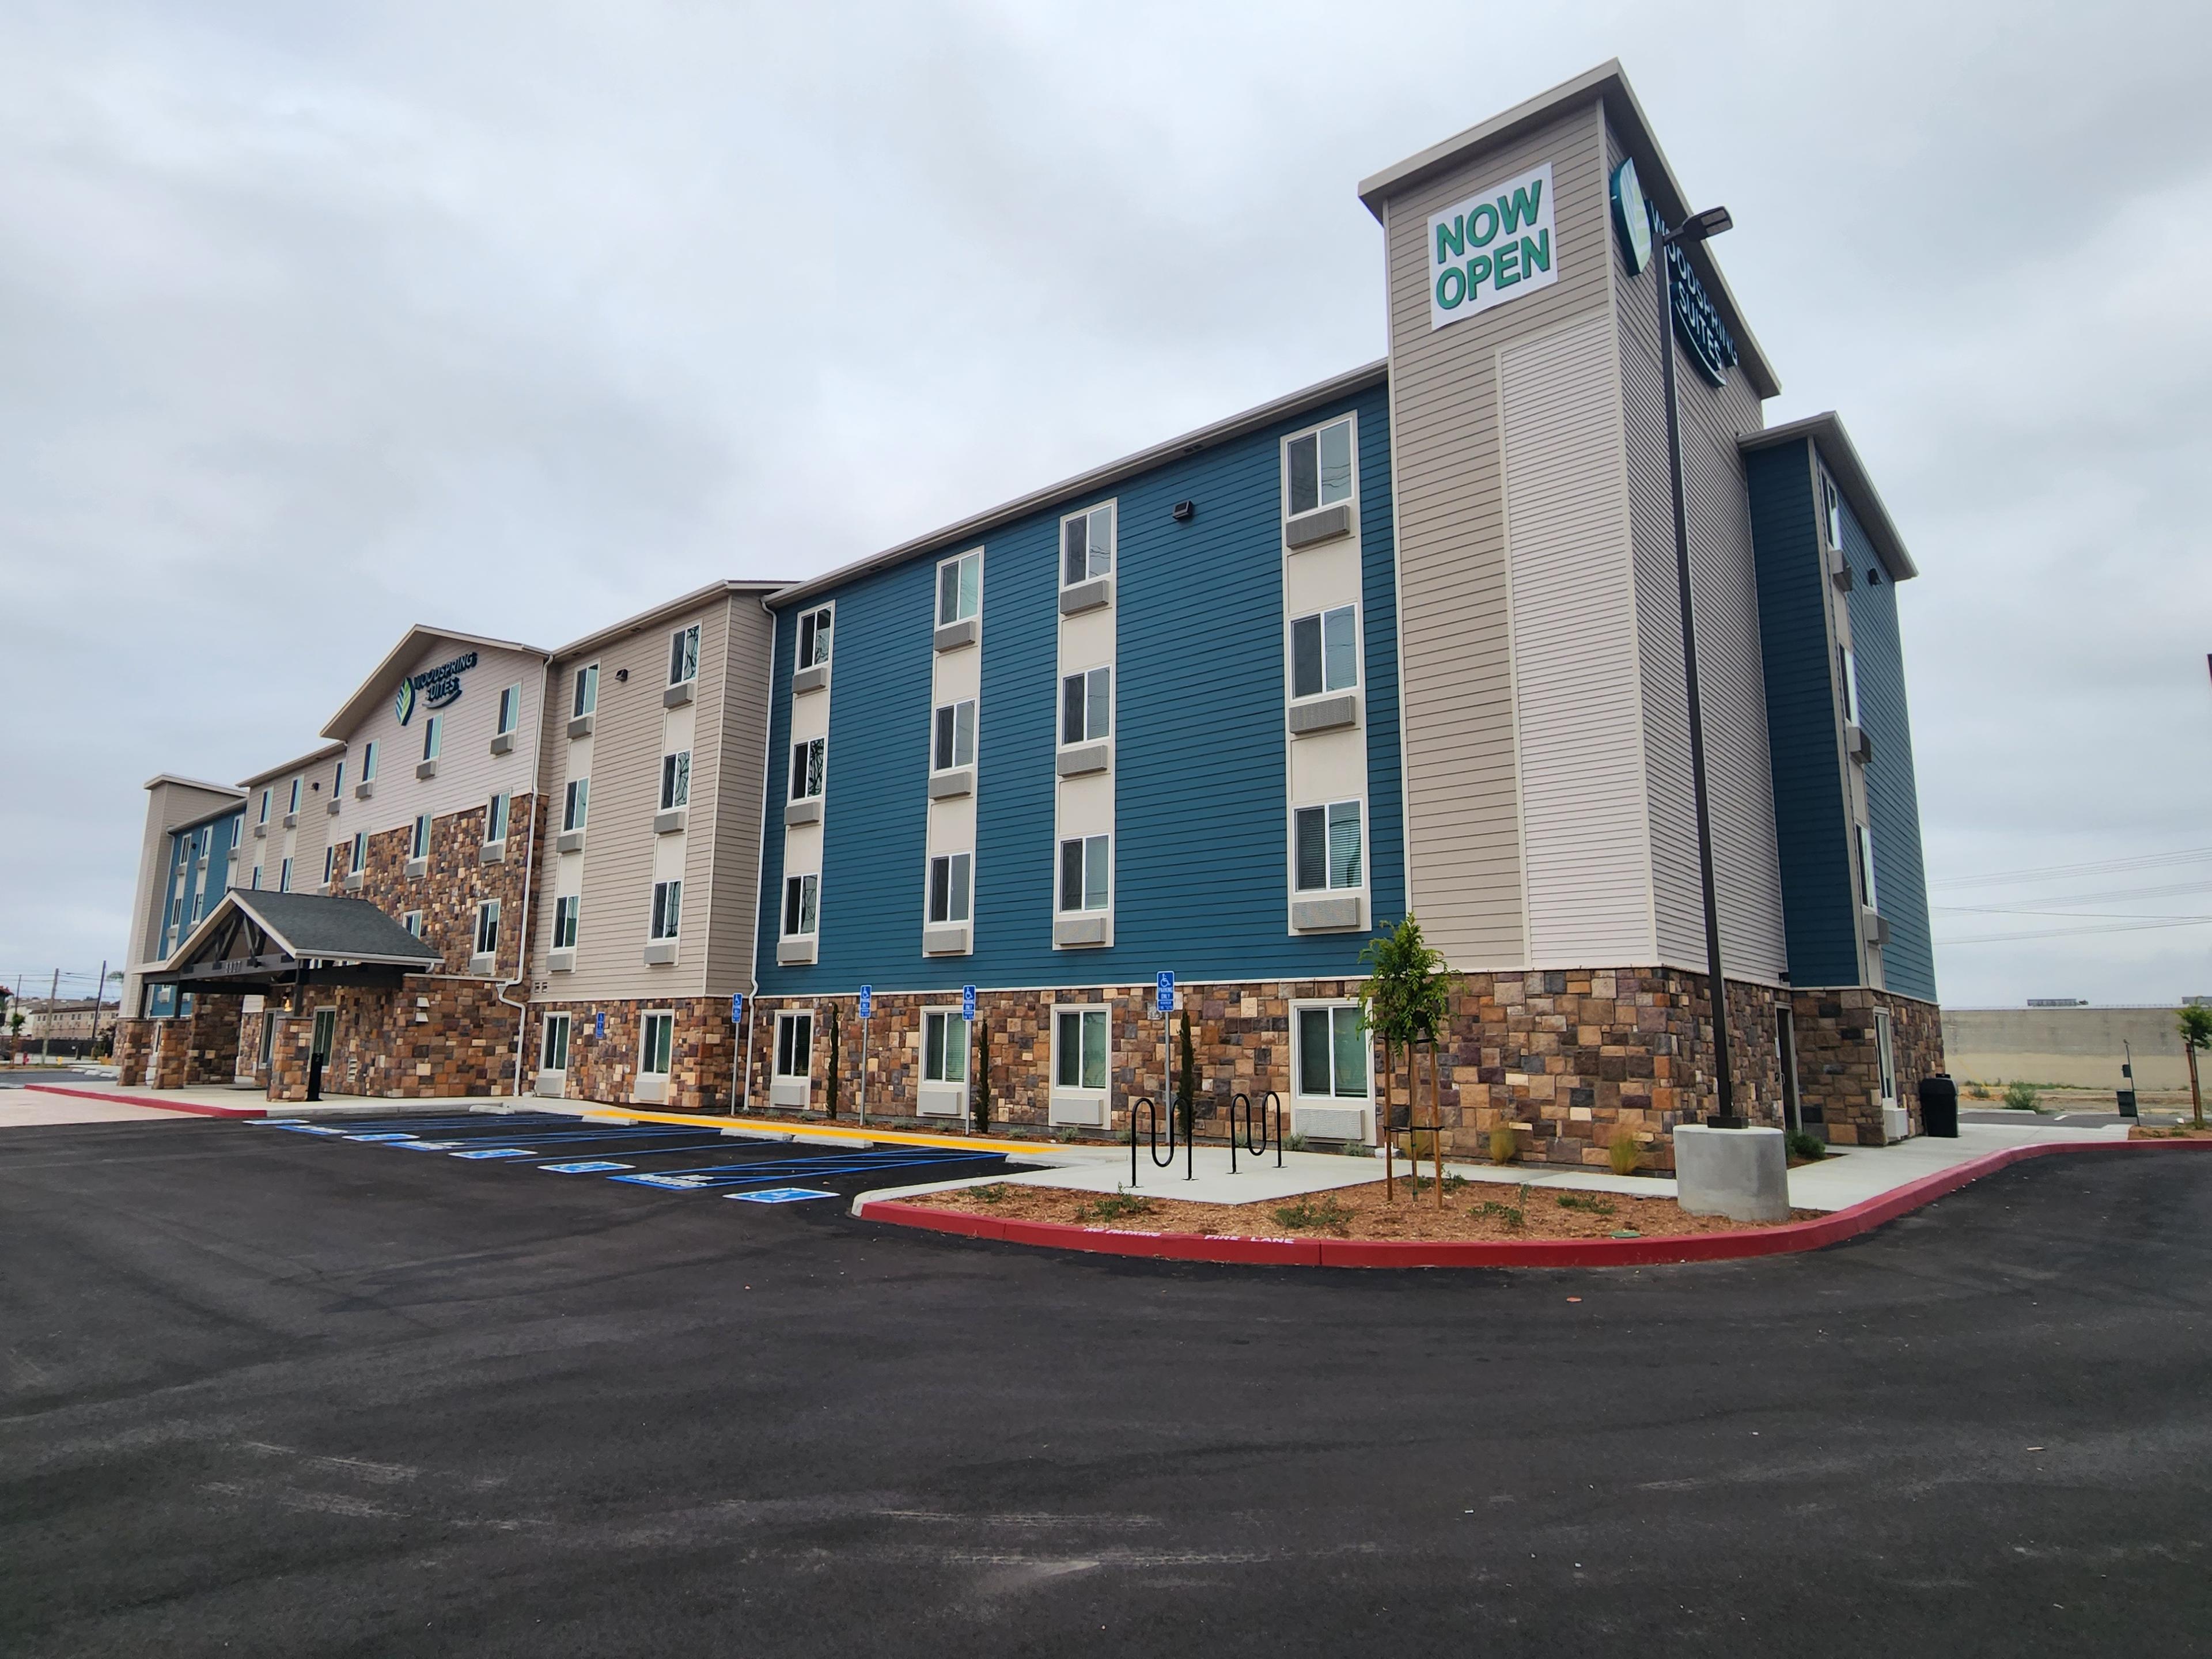 Exterior view of the WoodSpring Suites hotel in Bellflower, CA.